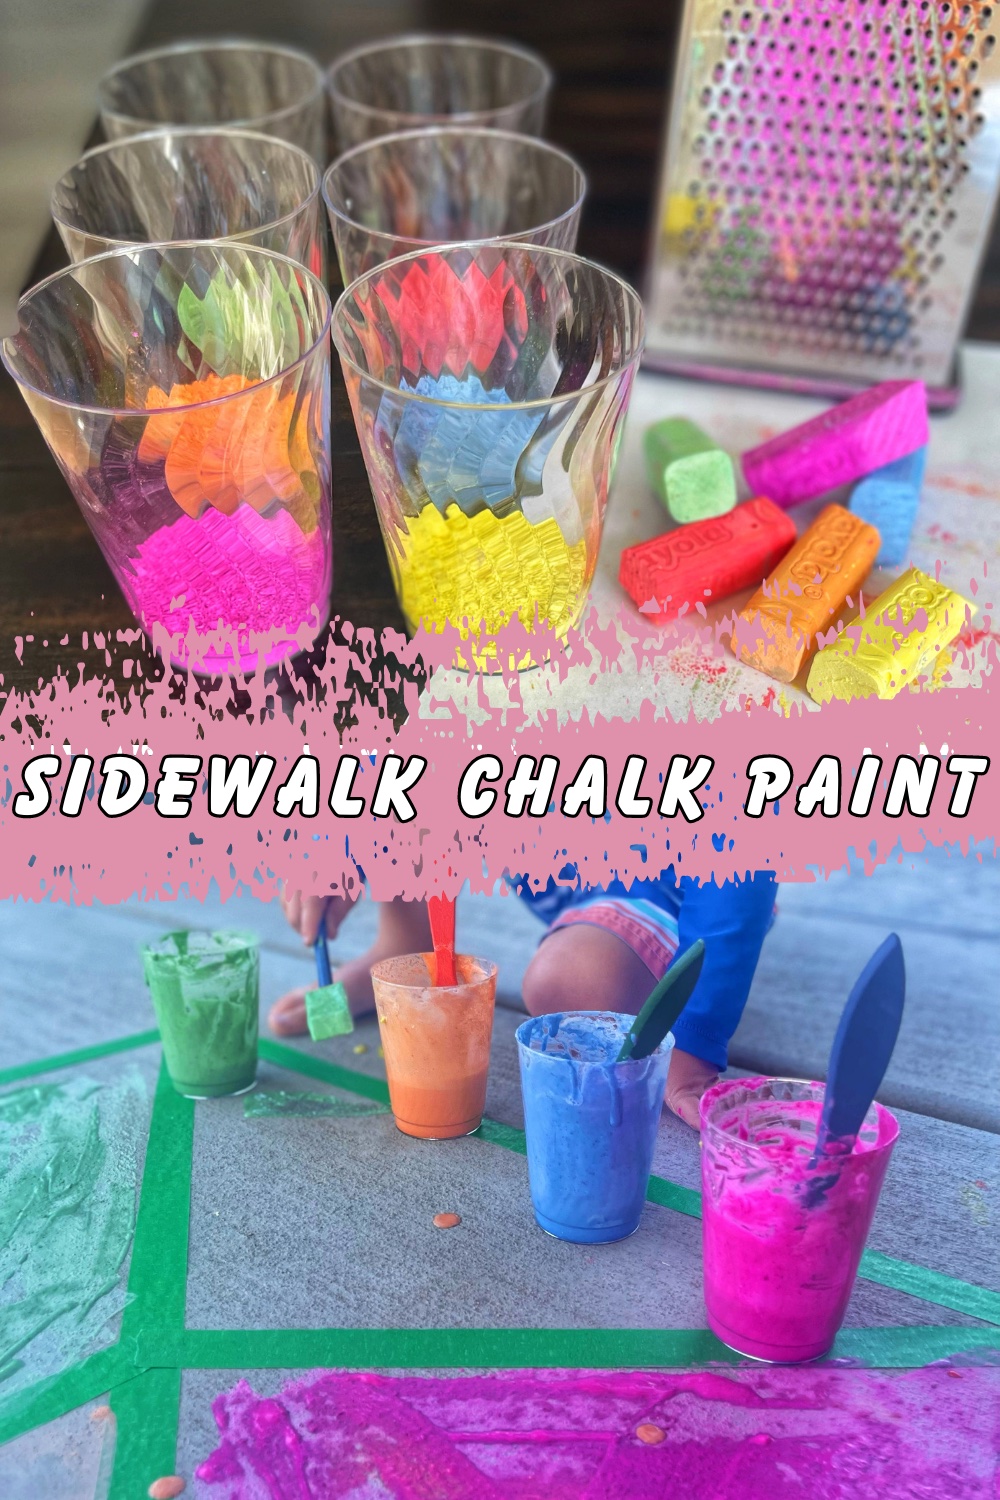 If you're looking for an inexpensive recycled art art project, you have to try this sidewalk chalk paint! It's super easy to make. The kids will enjoy helping make it!